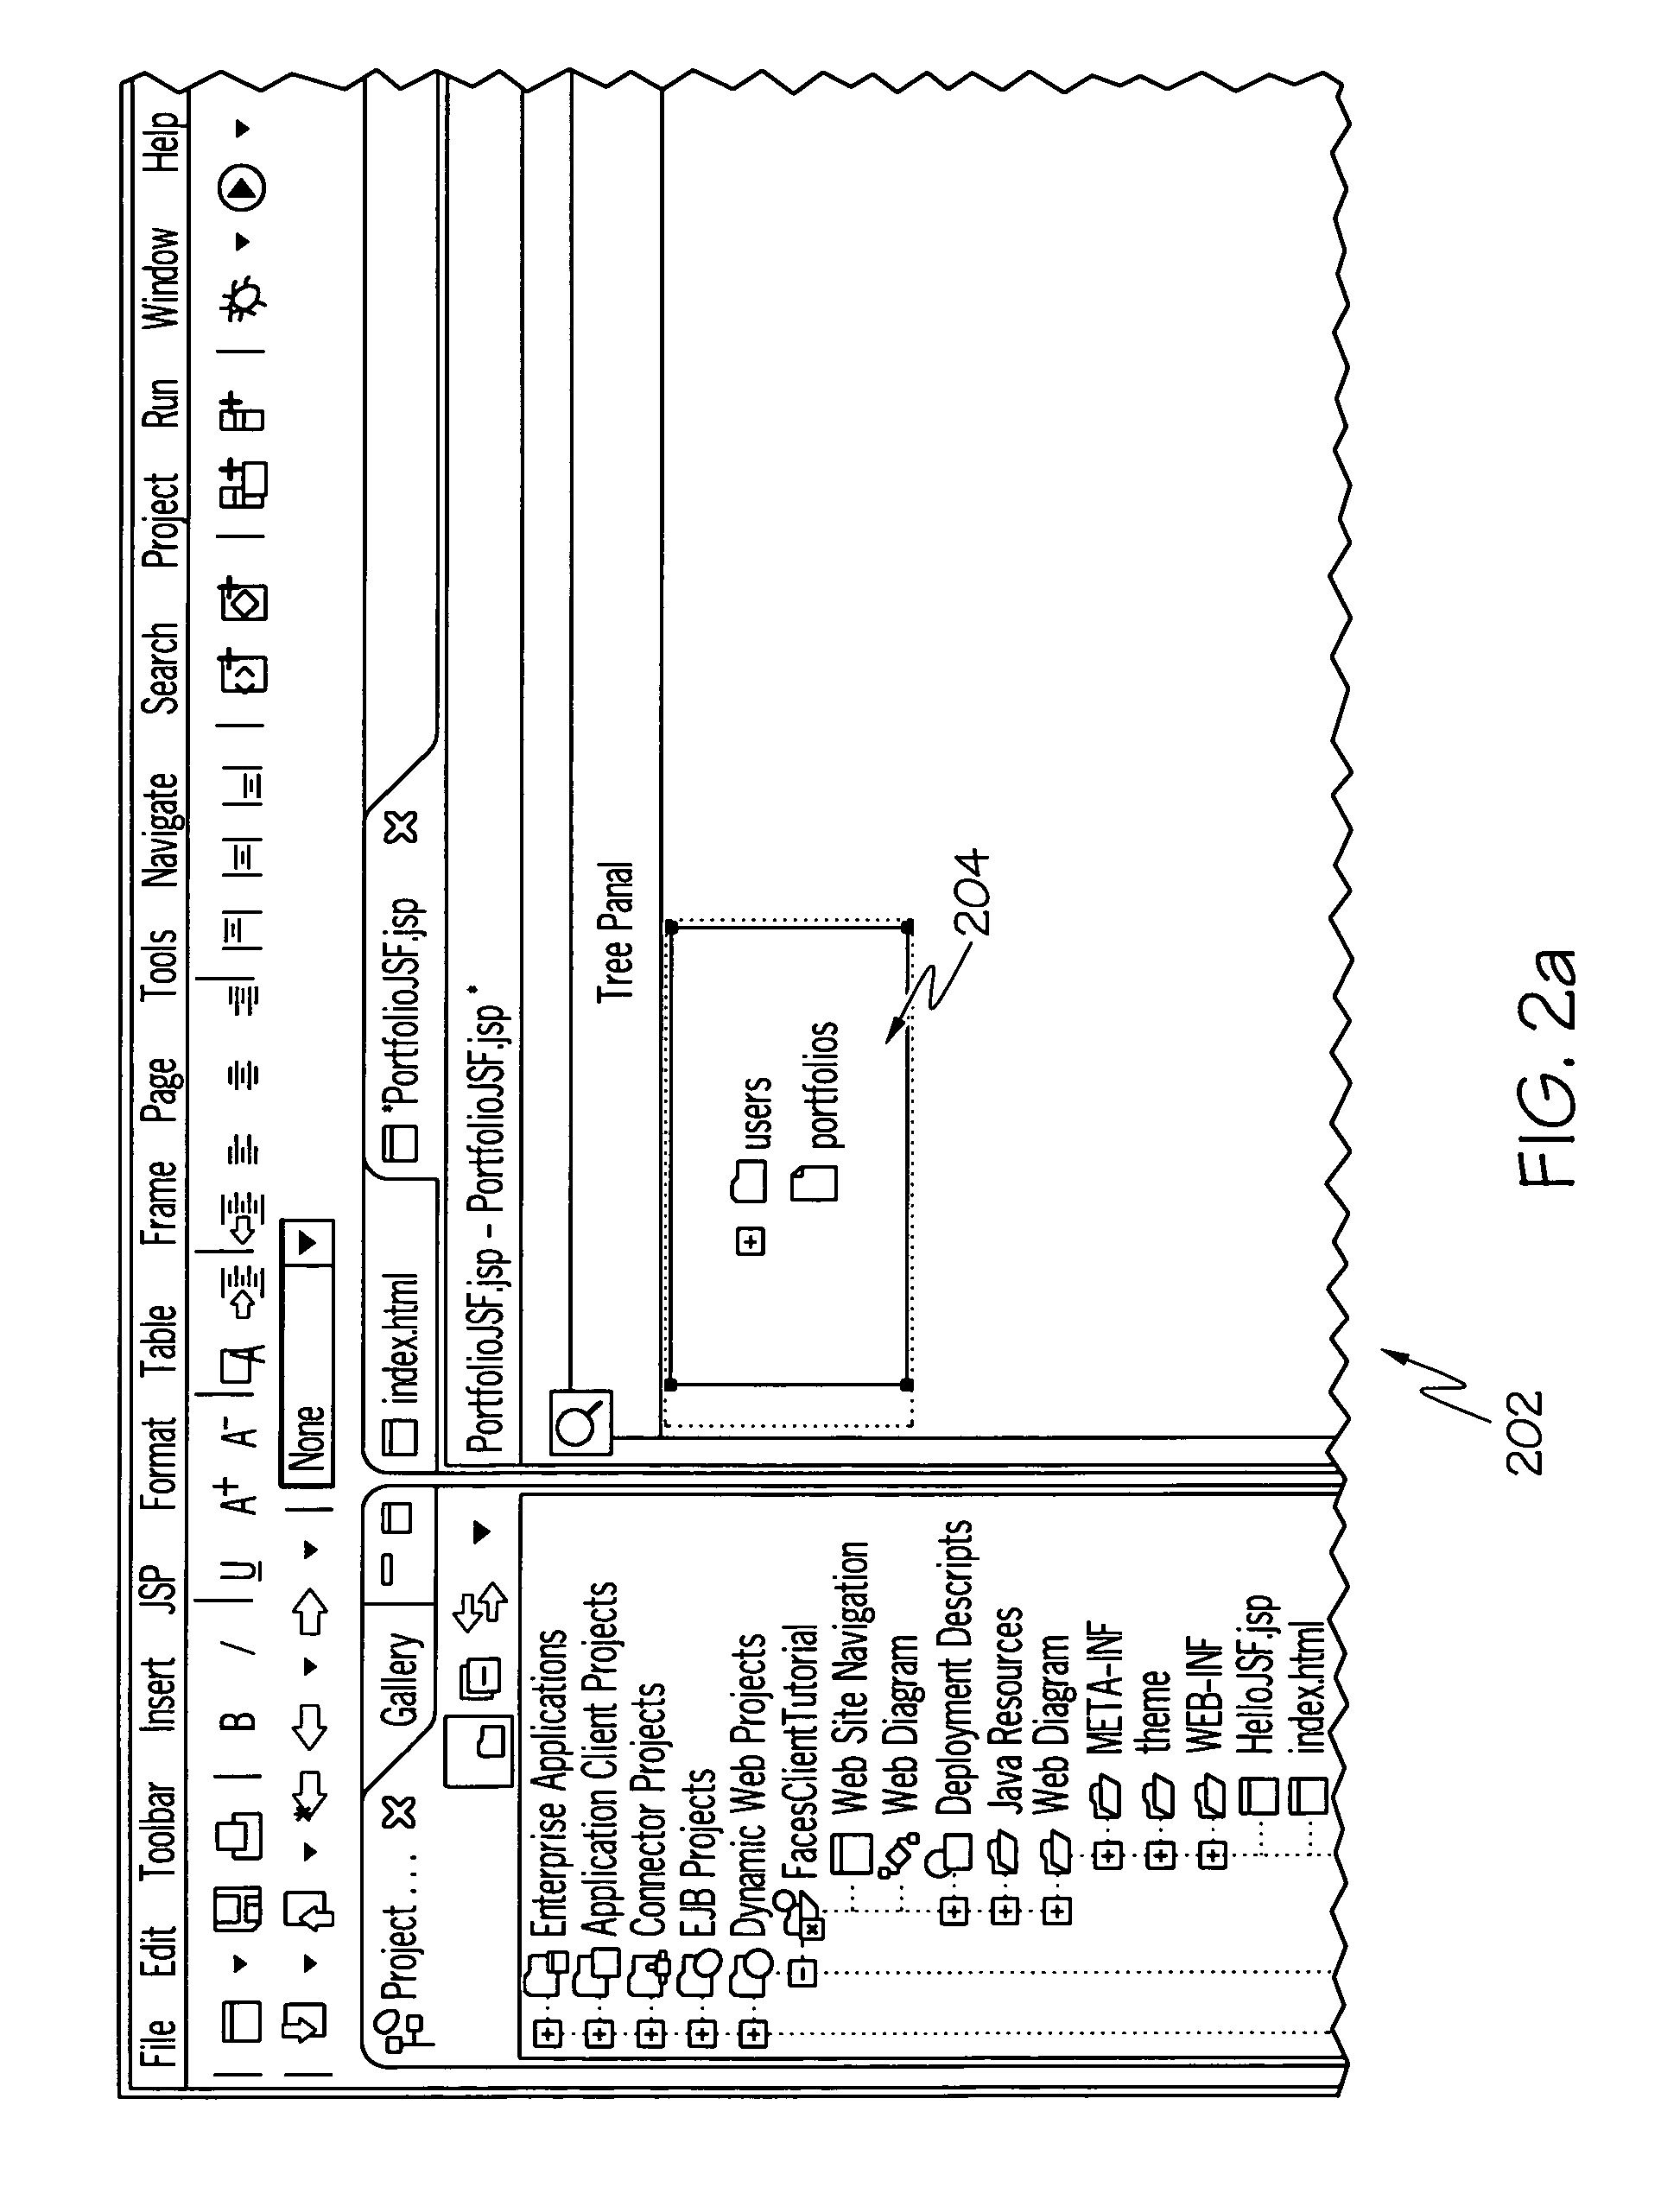 Enhanced visualization and selection of multi-layered elements in a containment hierarchy